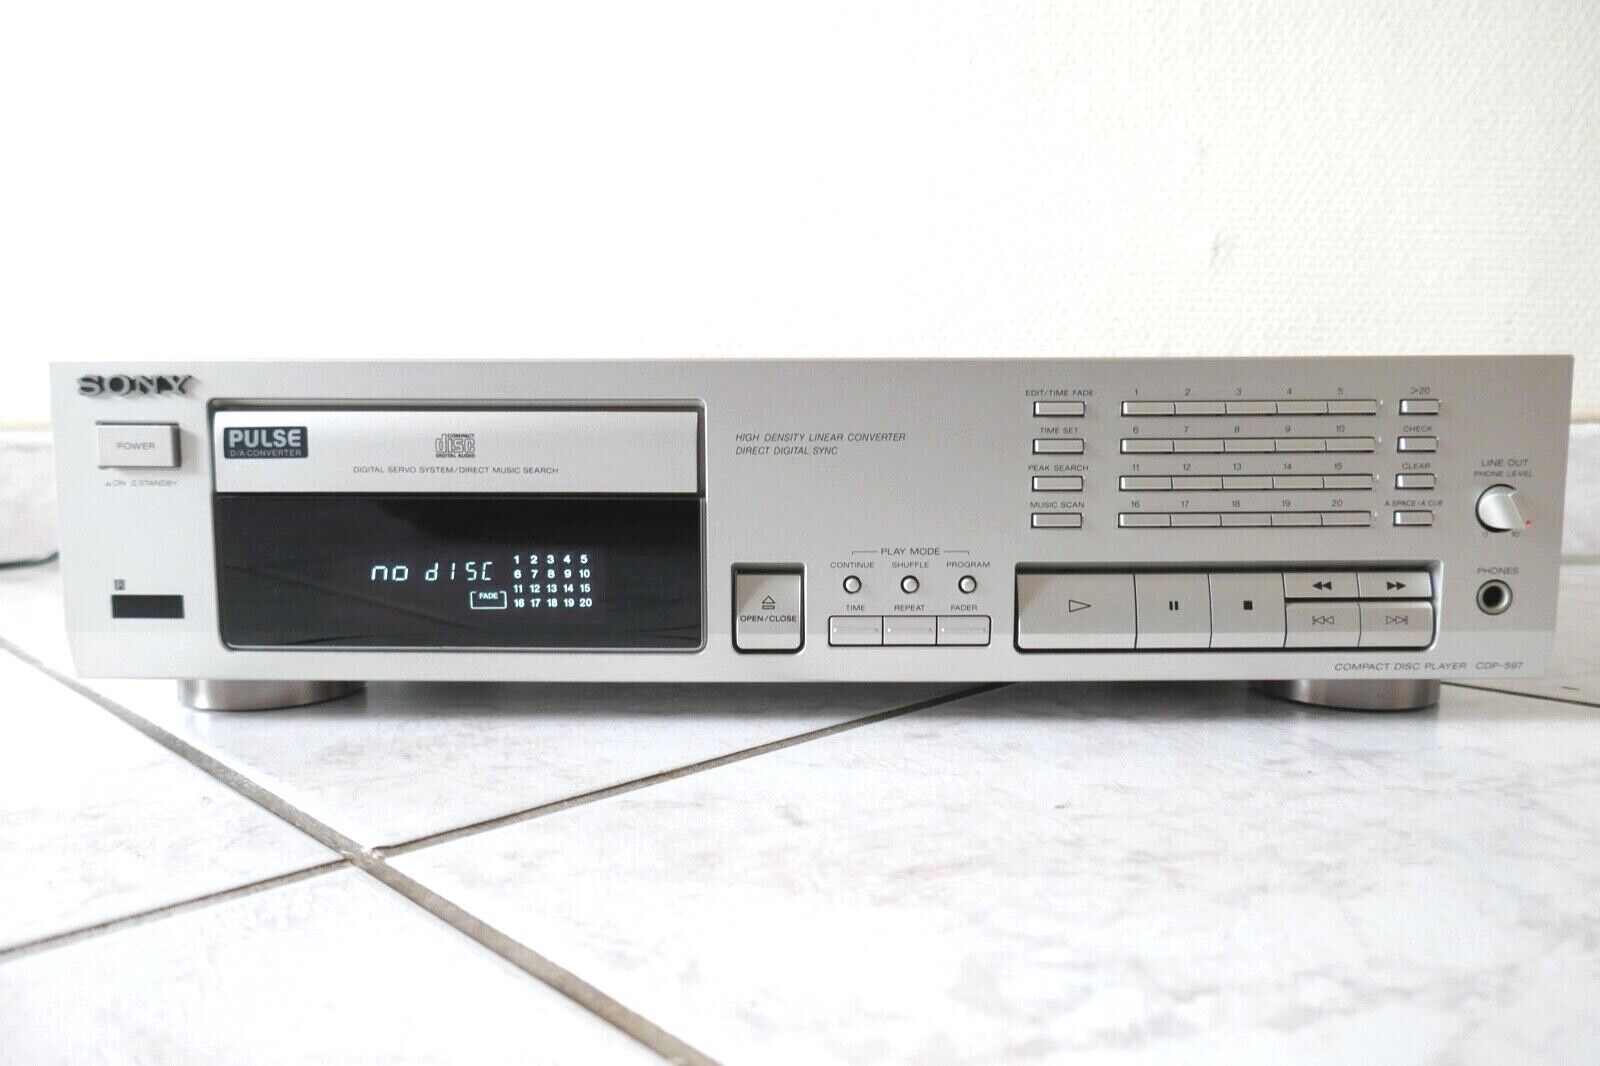 lecteur compact disc player sony cdp-597 occasion vintage